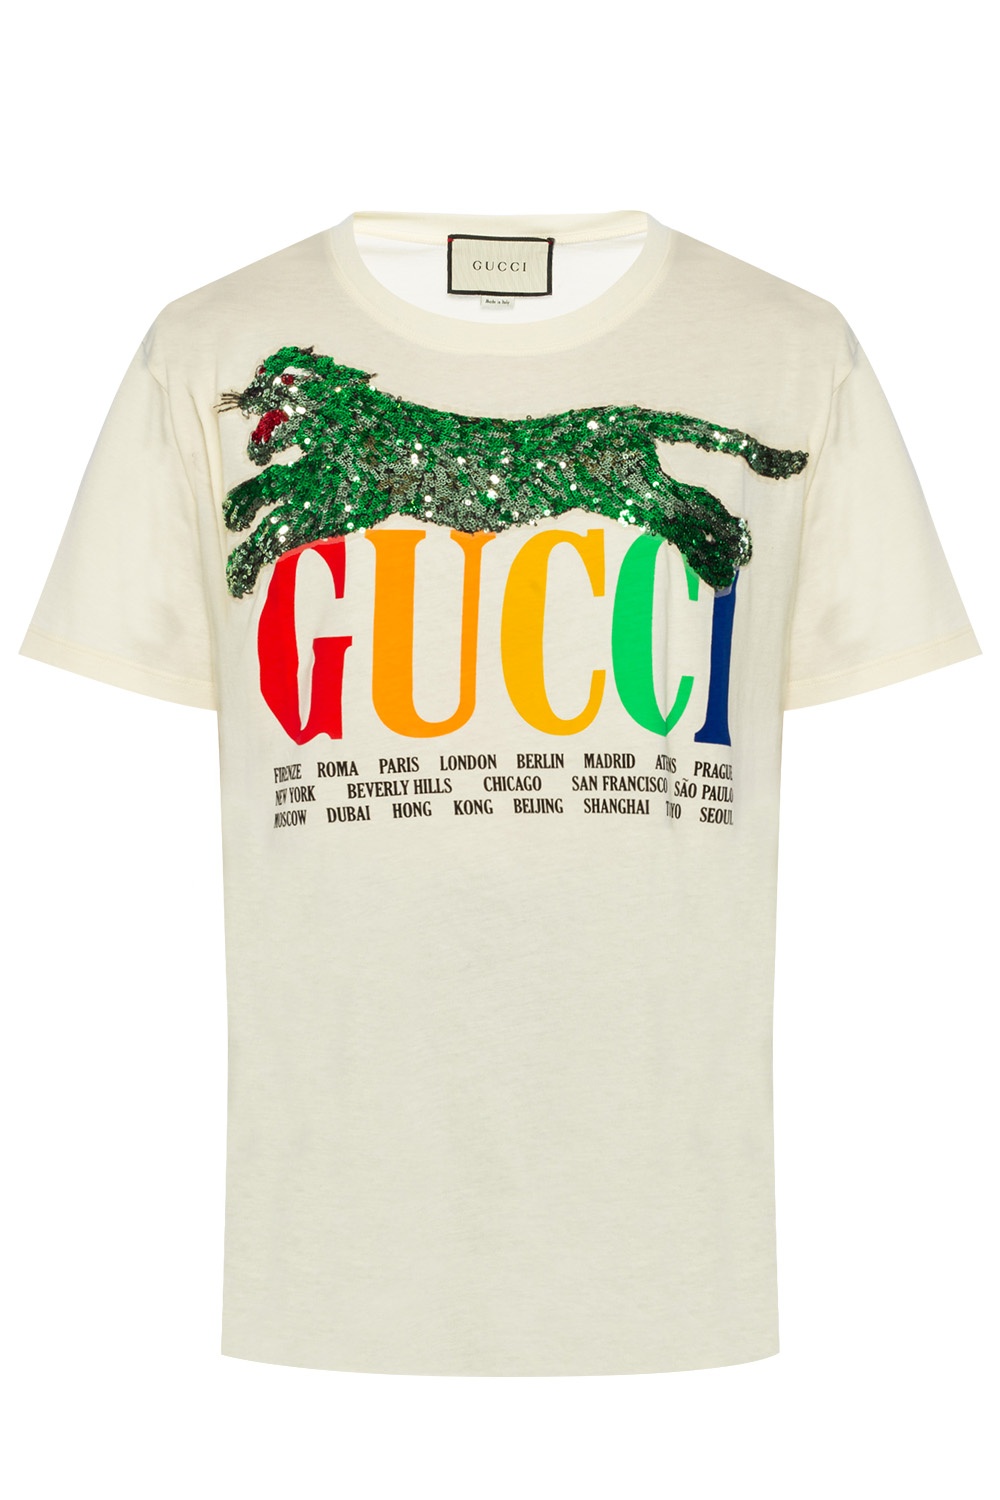 GUCCI New 100% With Tag Authentic T - shirt | WEBSITE HÀNG HIỆU DUY NHẤT  VIỆT NAM